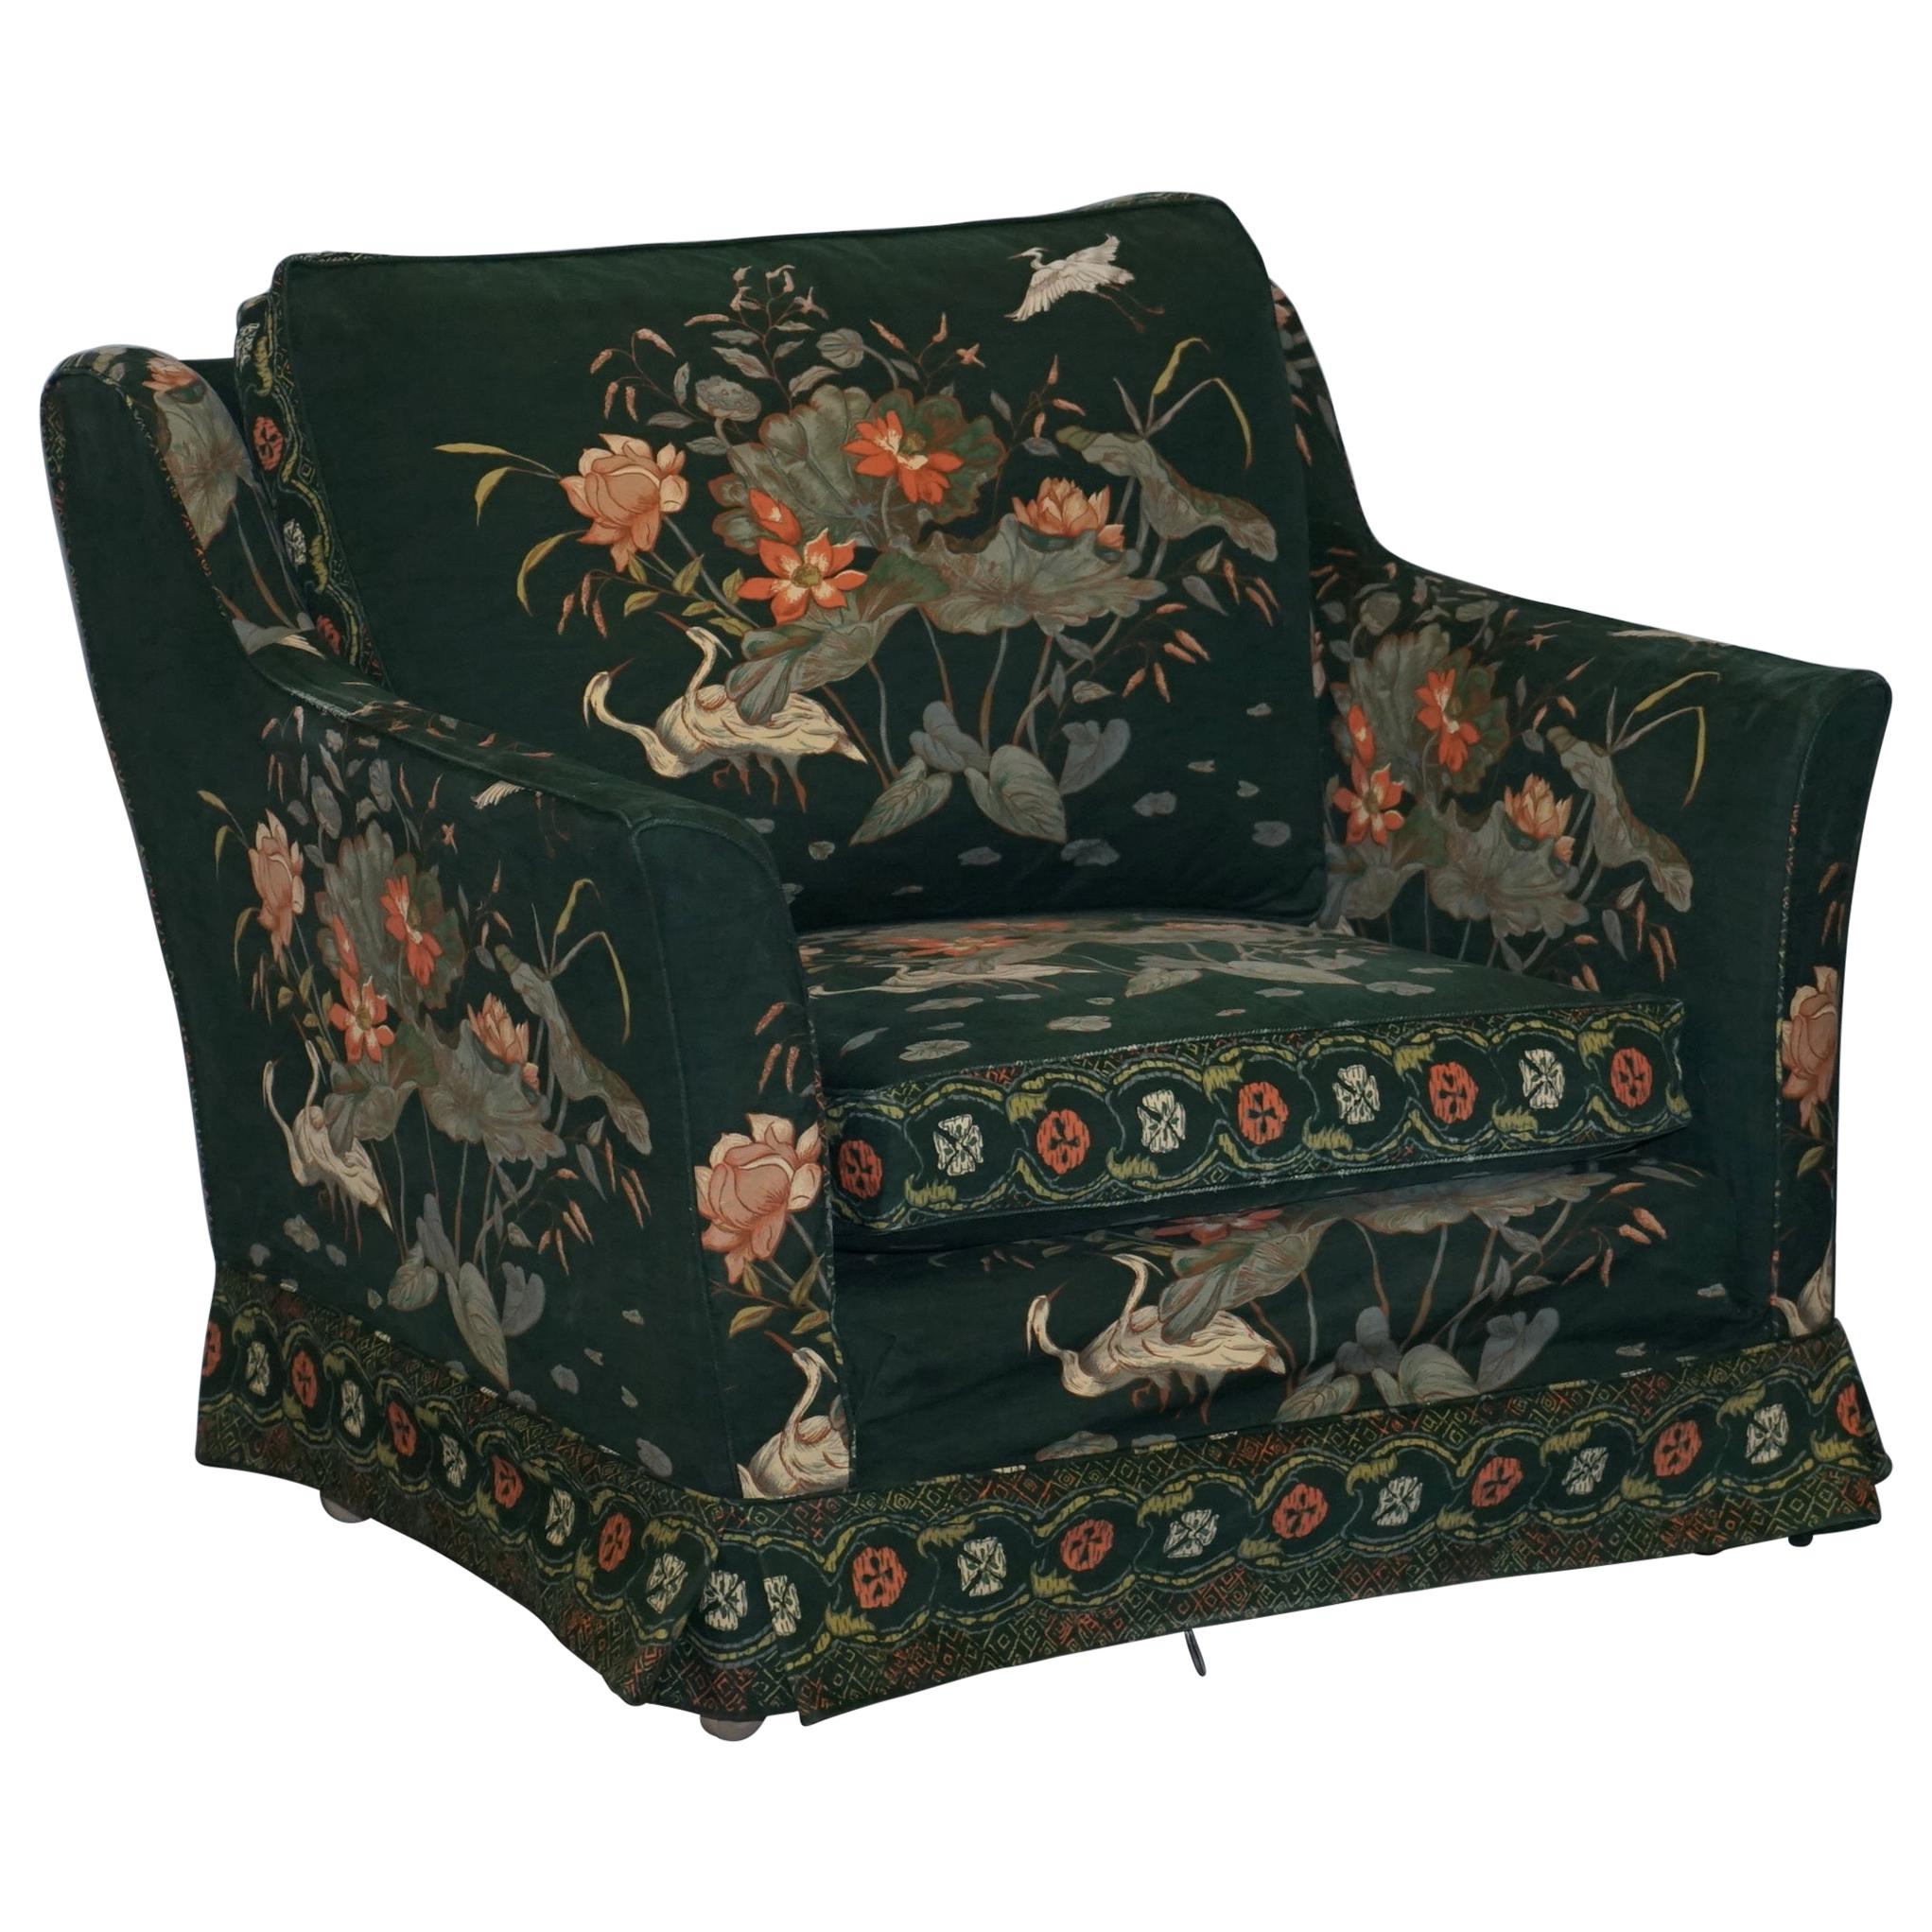 Oriental Floral and Bird Upholstery Vintage Country House Mansion Club Armchair